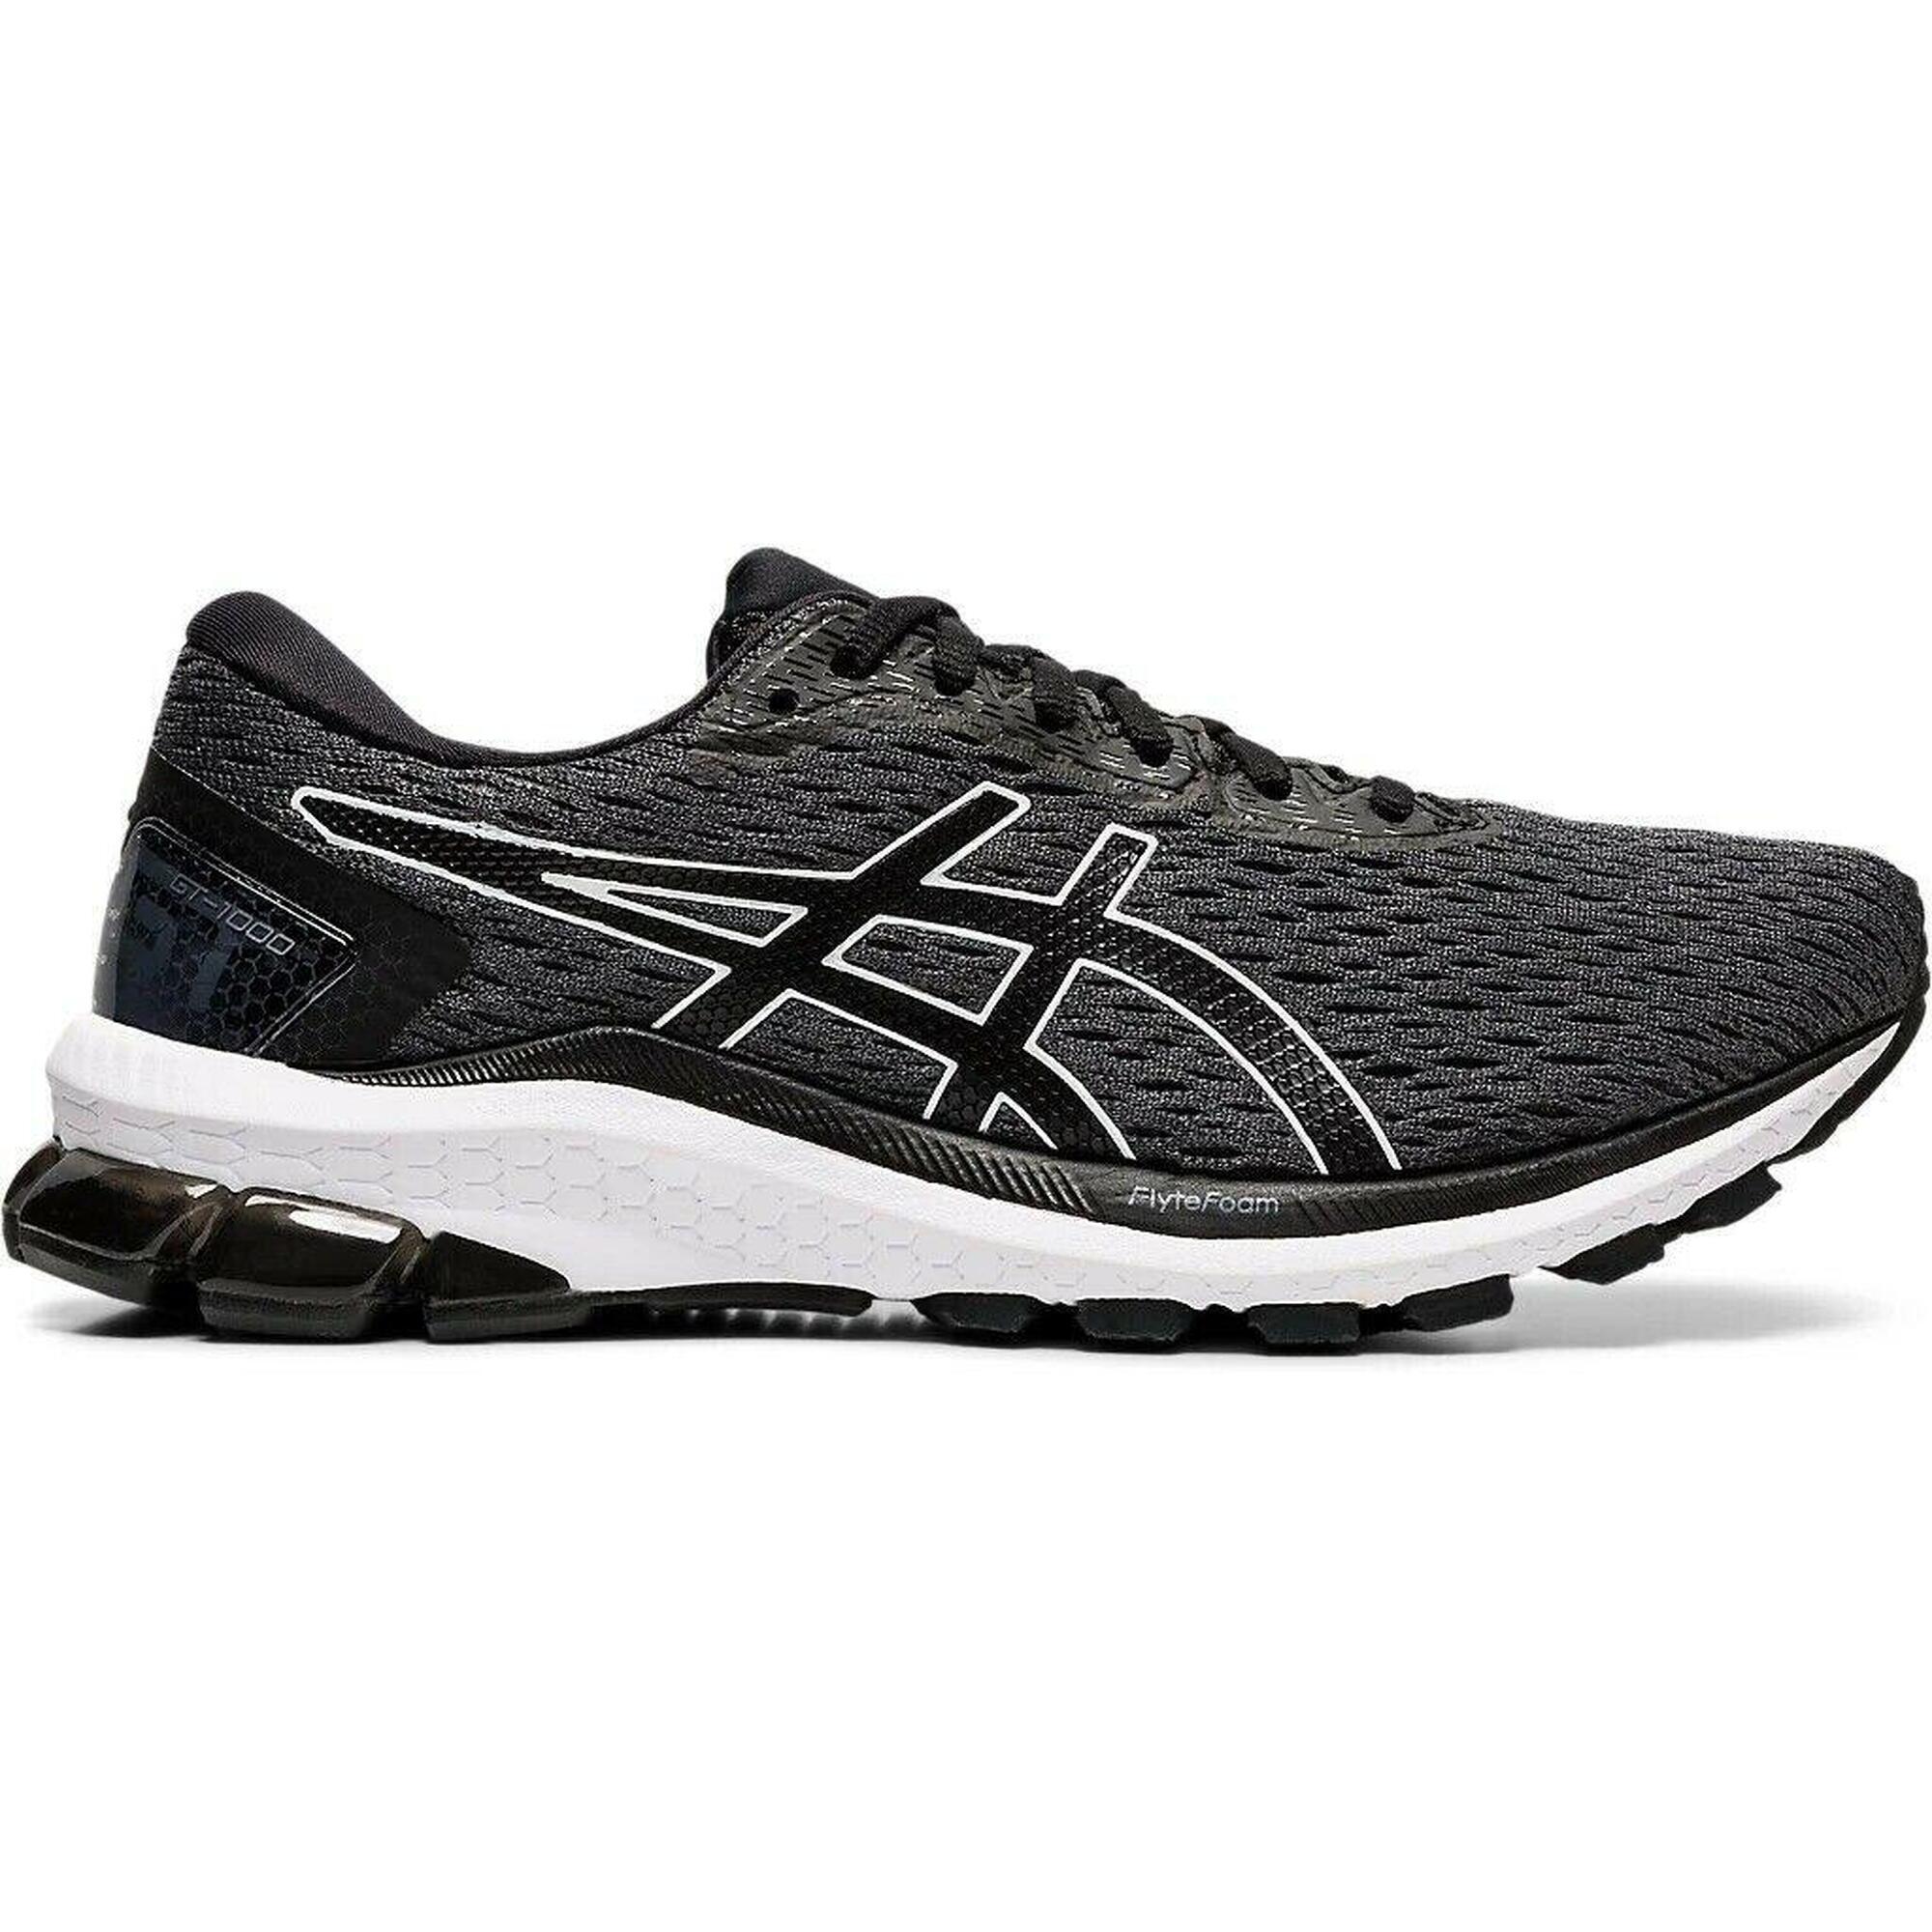 ASICS Asics Gt-1000 9 Womens Trainers Carrier Grey